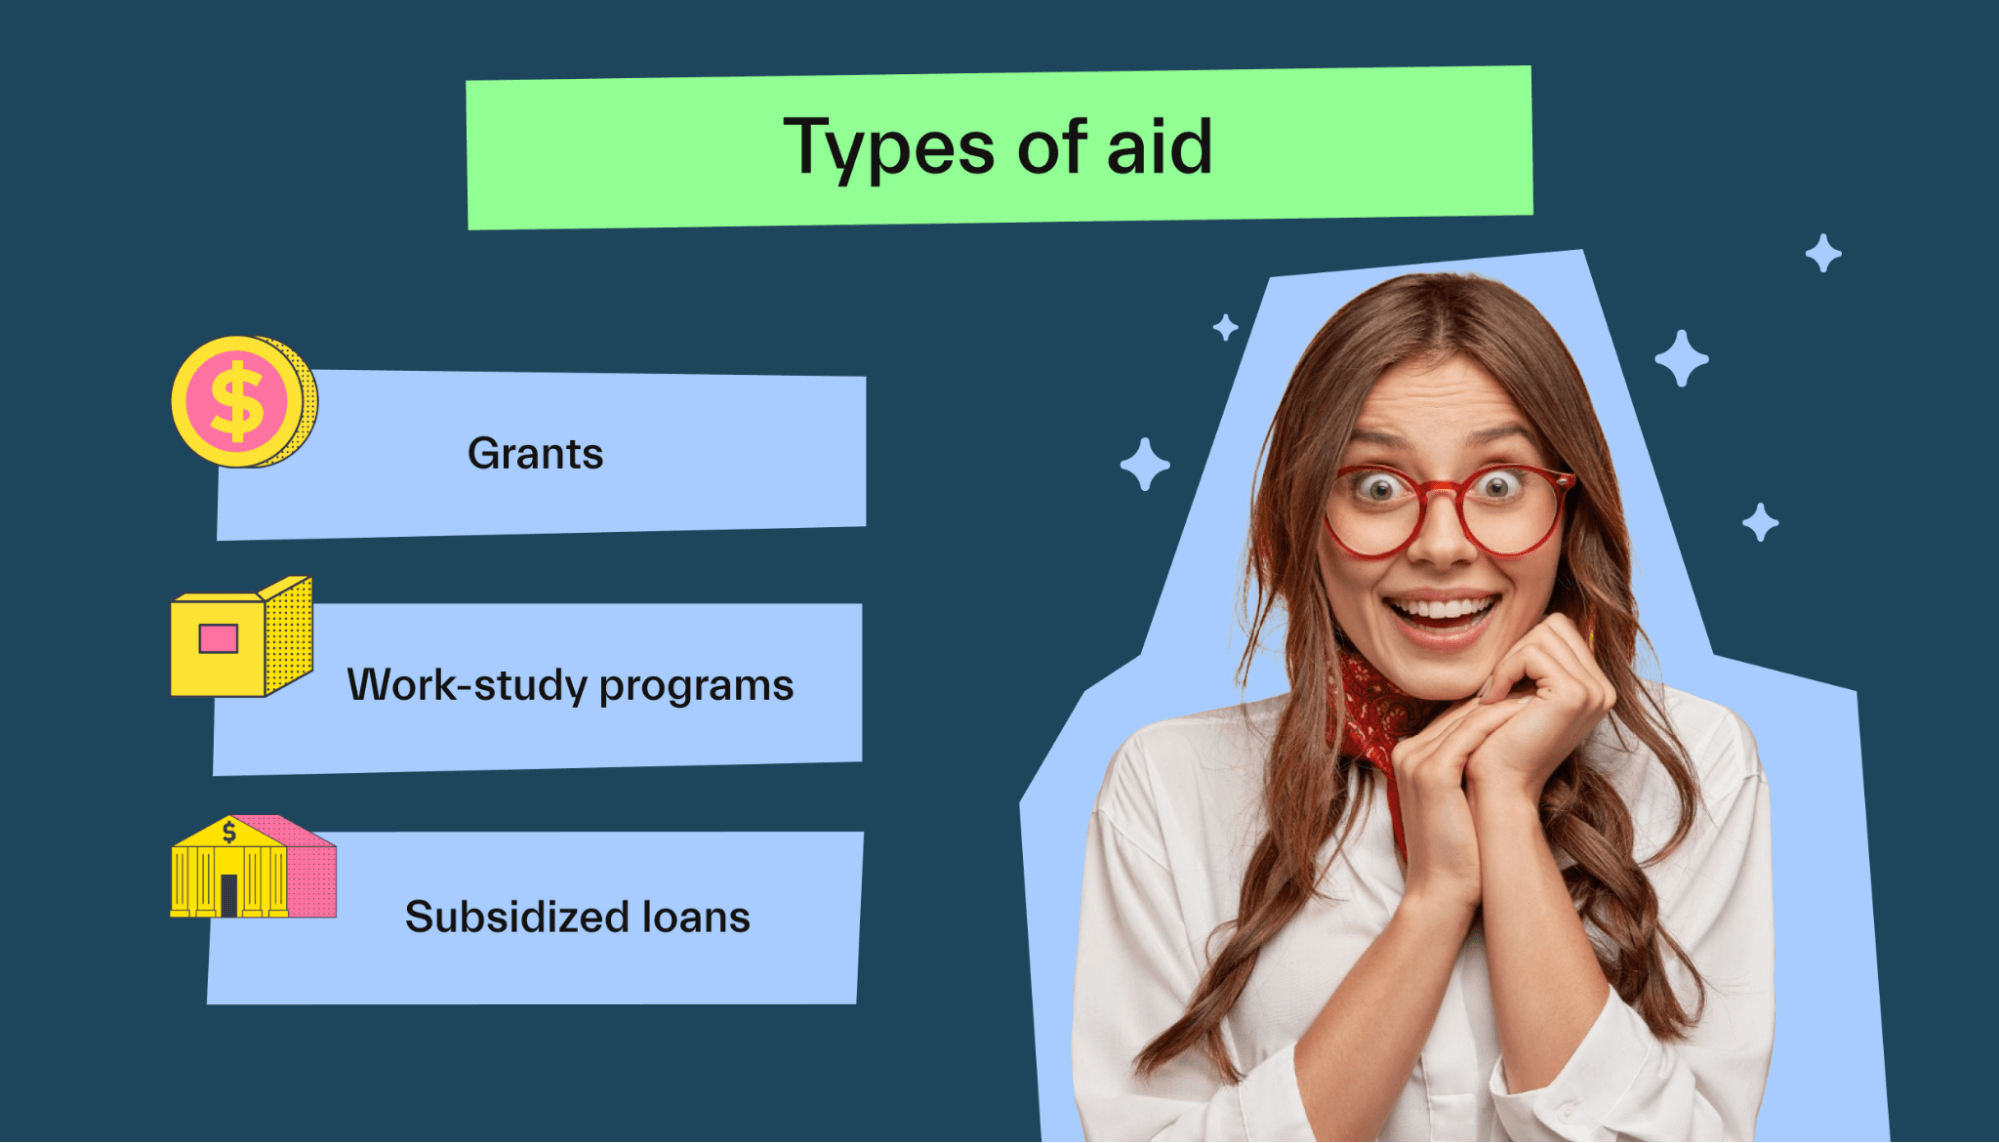 Types of aid